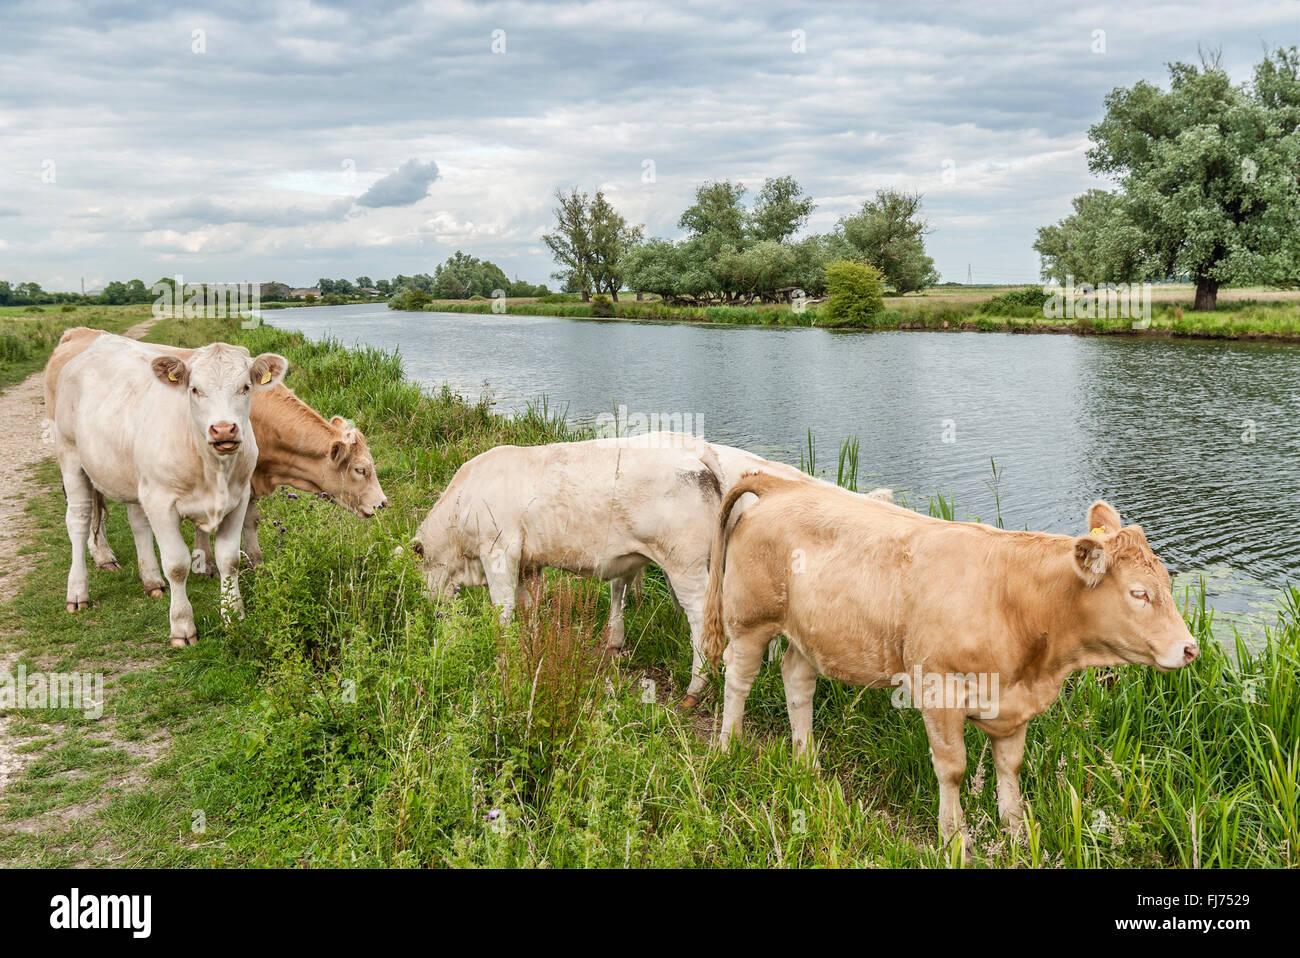 Cattle graze on a meadow in the Fens at the River Great Ouse near Ely, known as the Fenland, Cambridgeshire, England Stock Photo